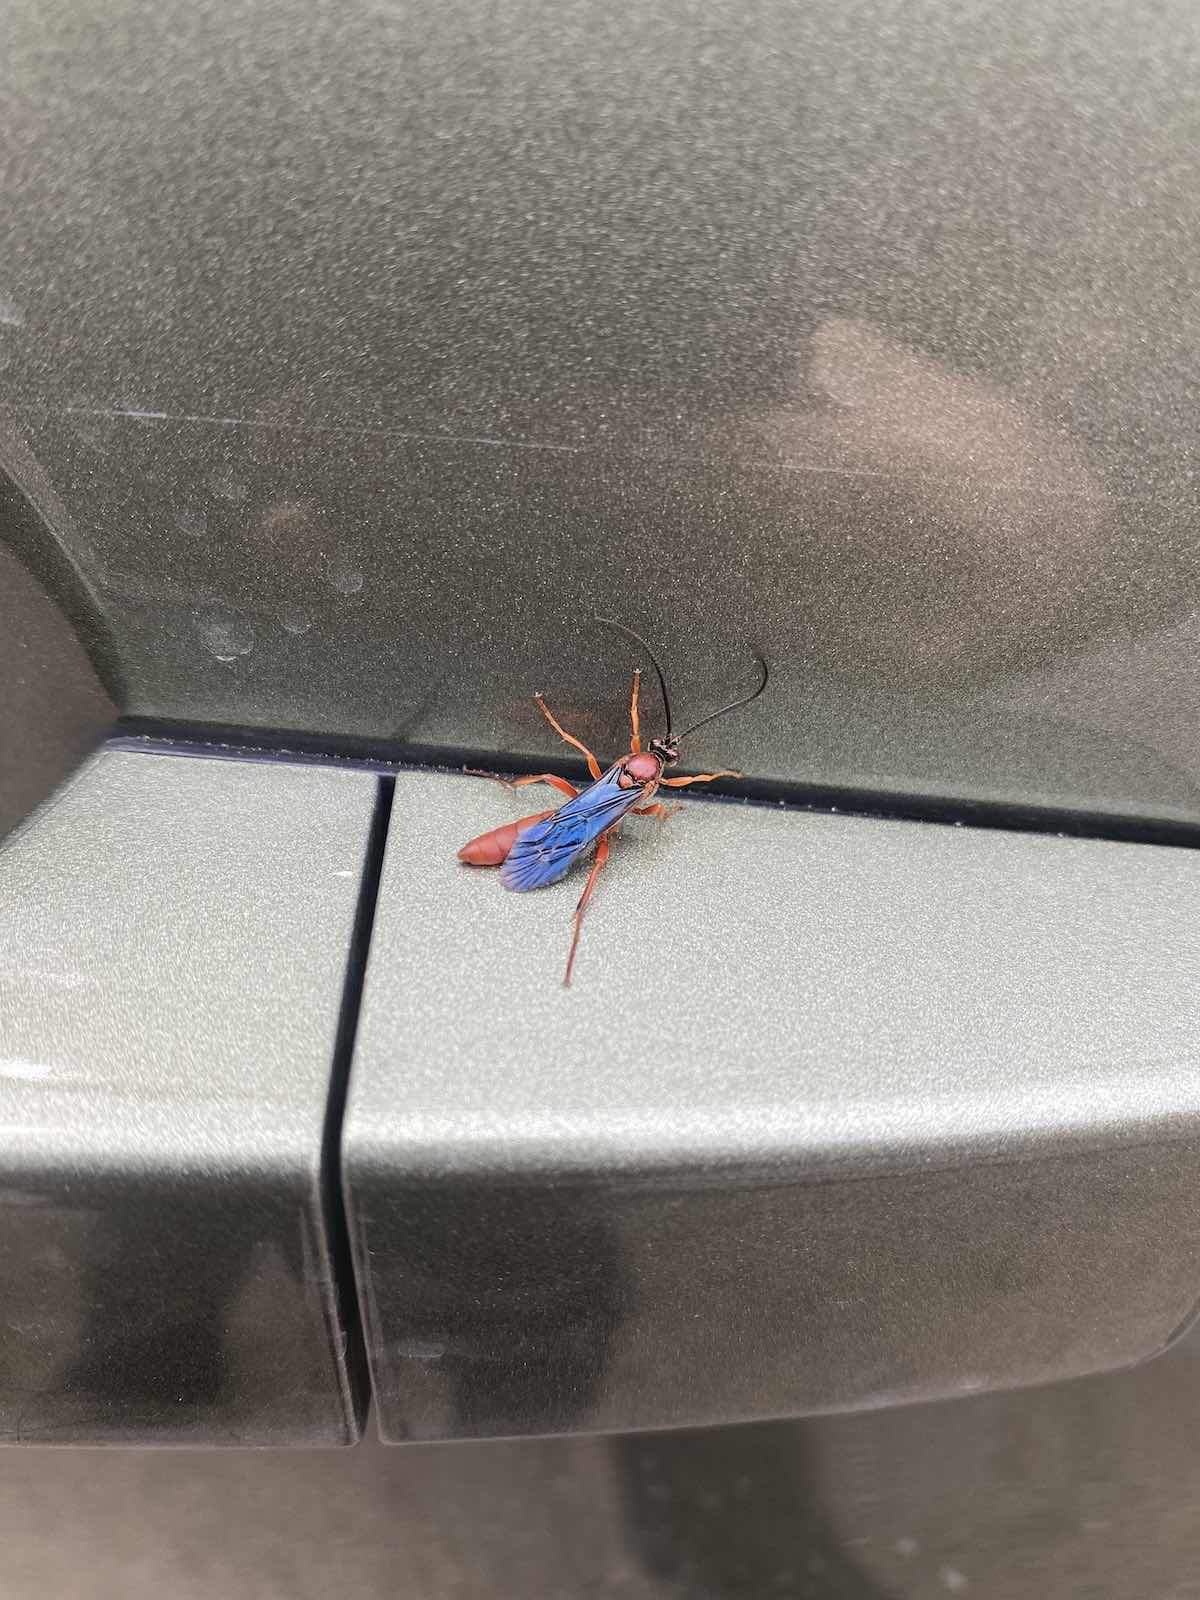 Spiderman insect